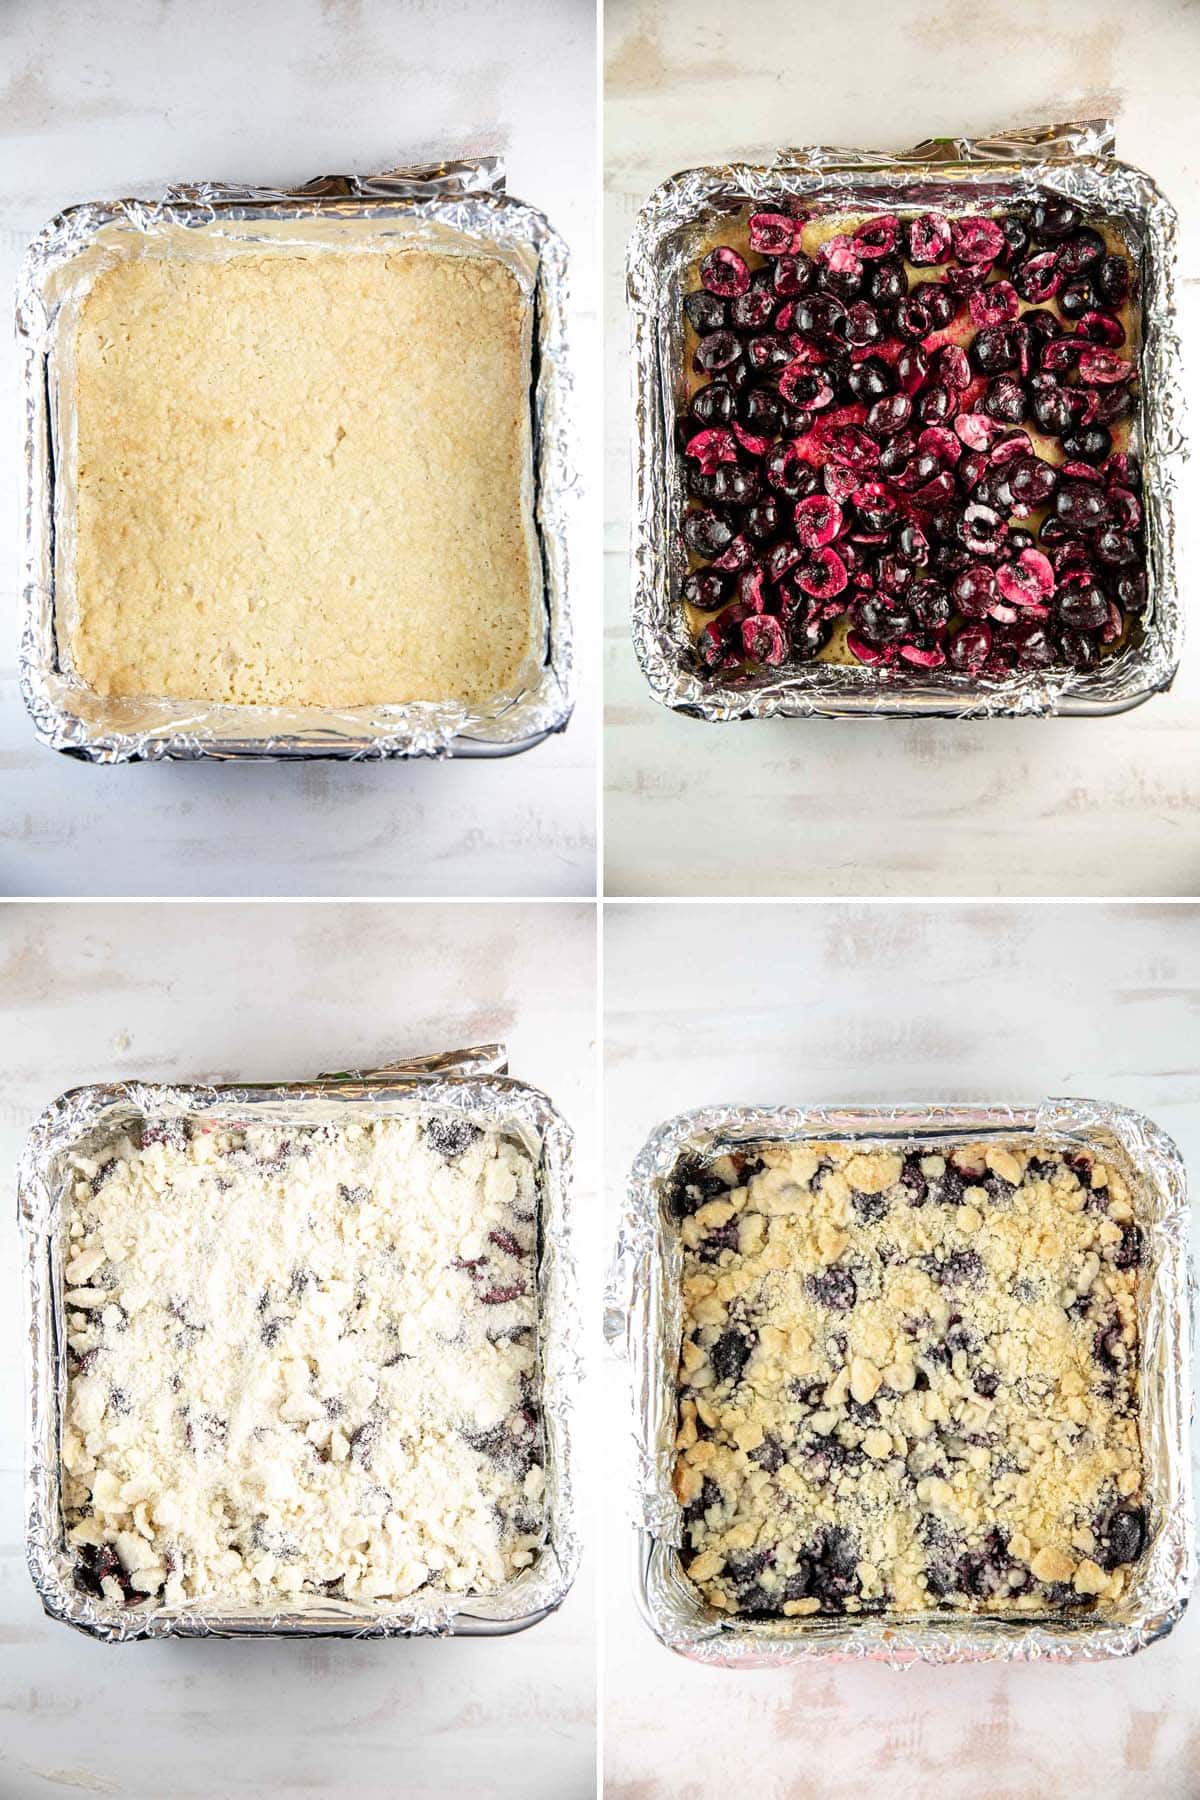 four steps of making cherry pie bars: crust, cherry filling, crumble topping, bake